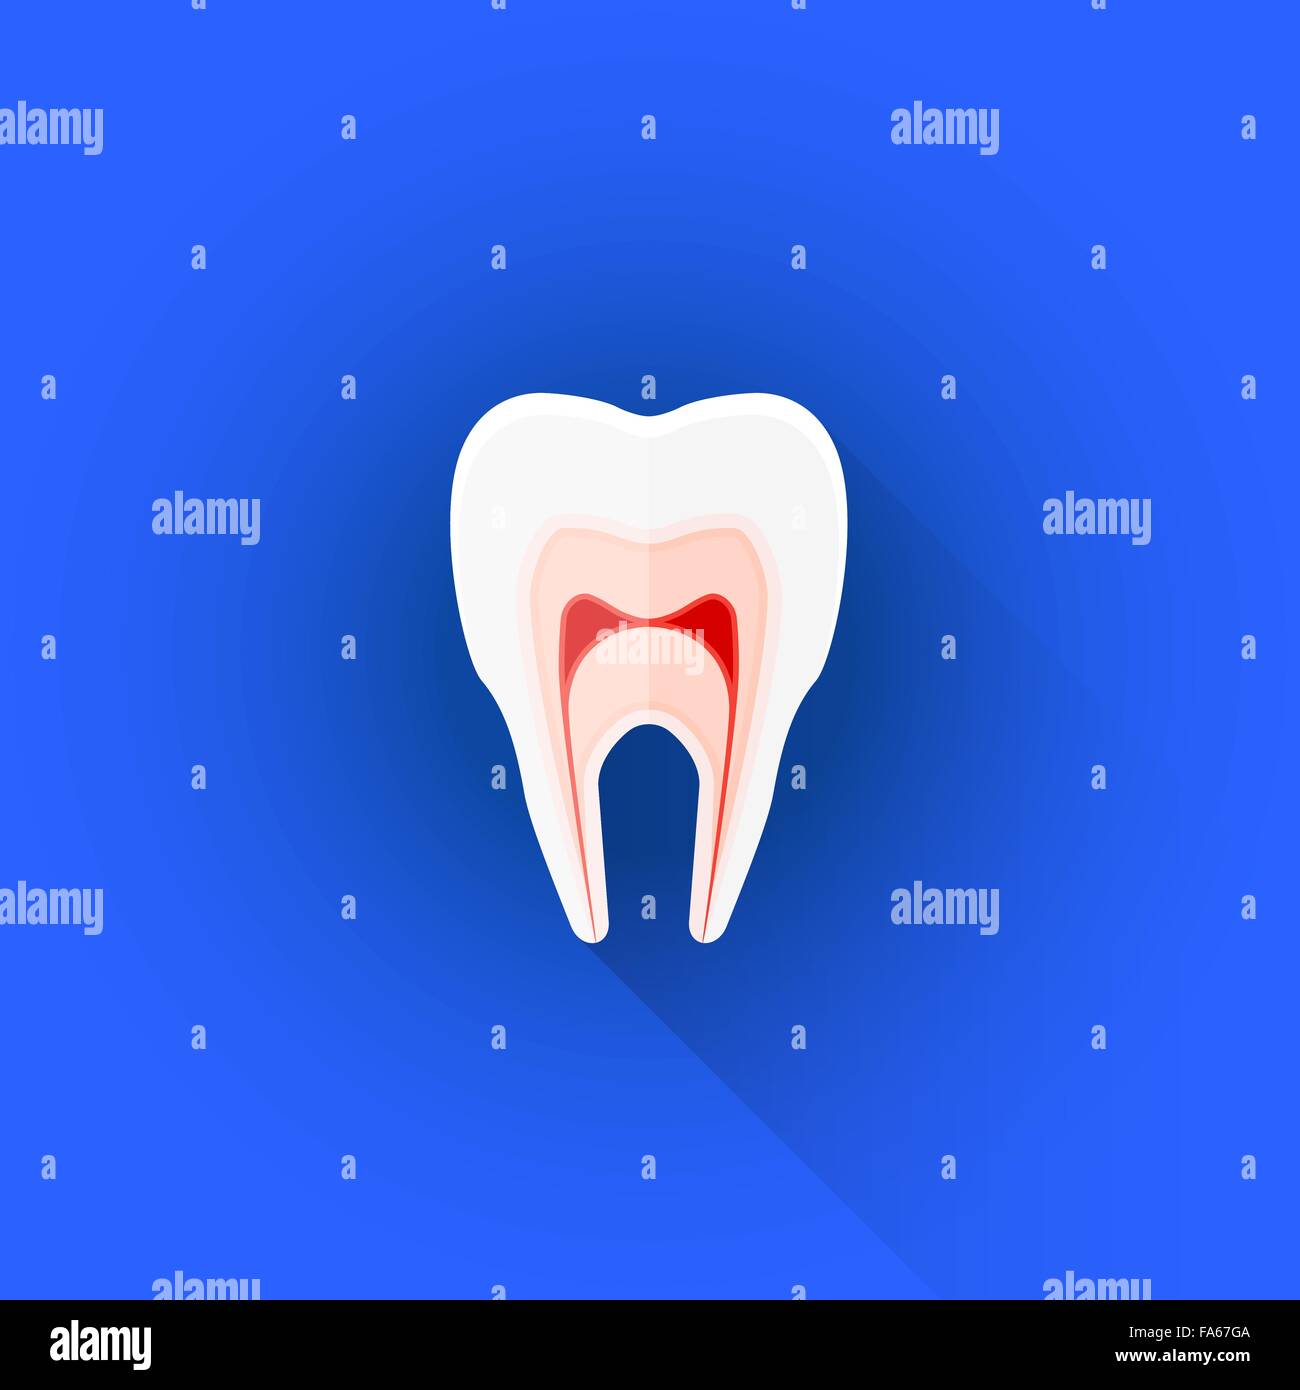 vector colored flat design sectional structure of human tooth illustration isolated blue background long shadow Stock Vector